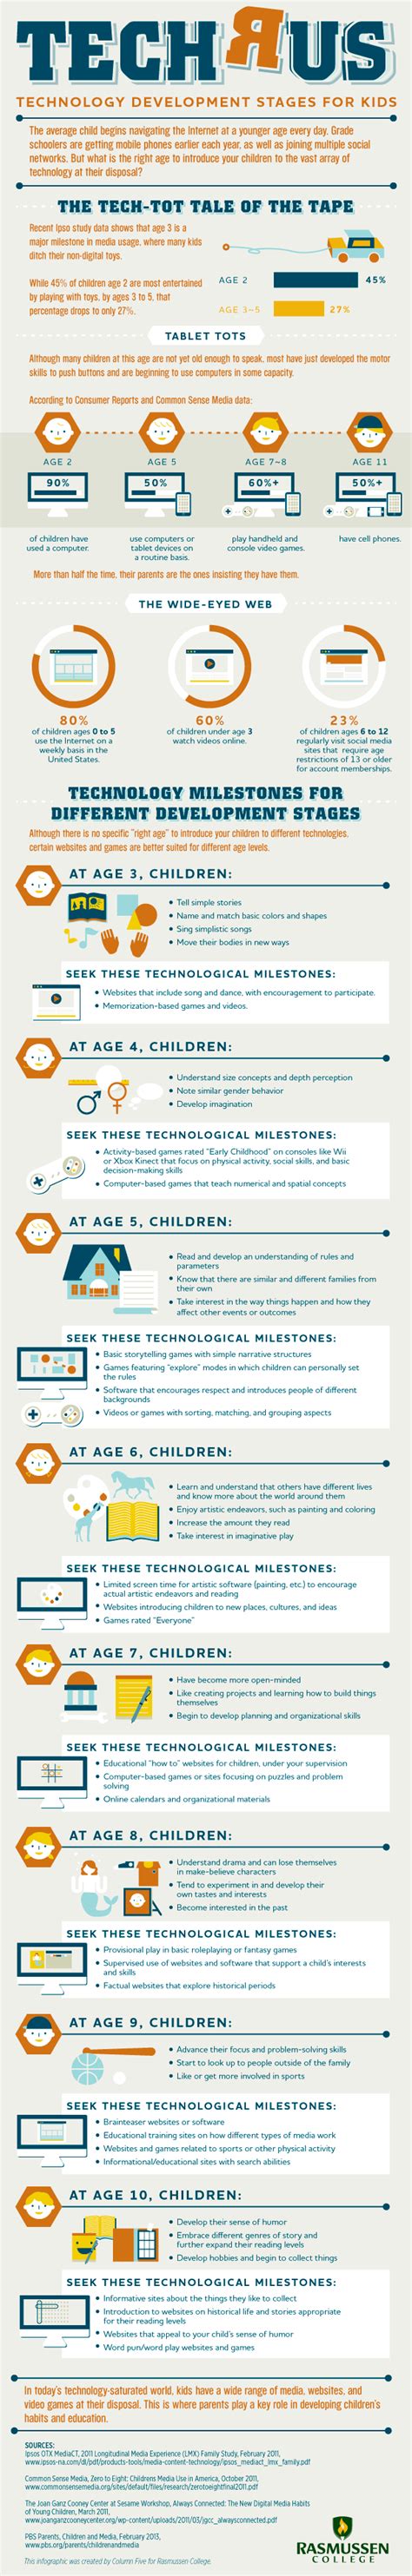 Educational Technology Development Stages For Kids